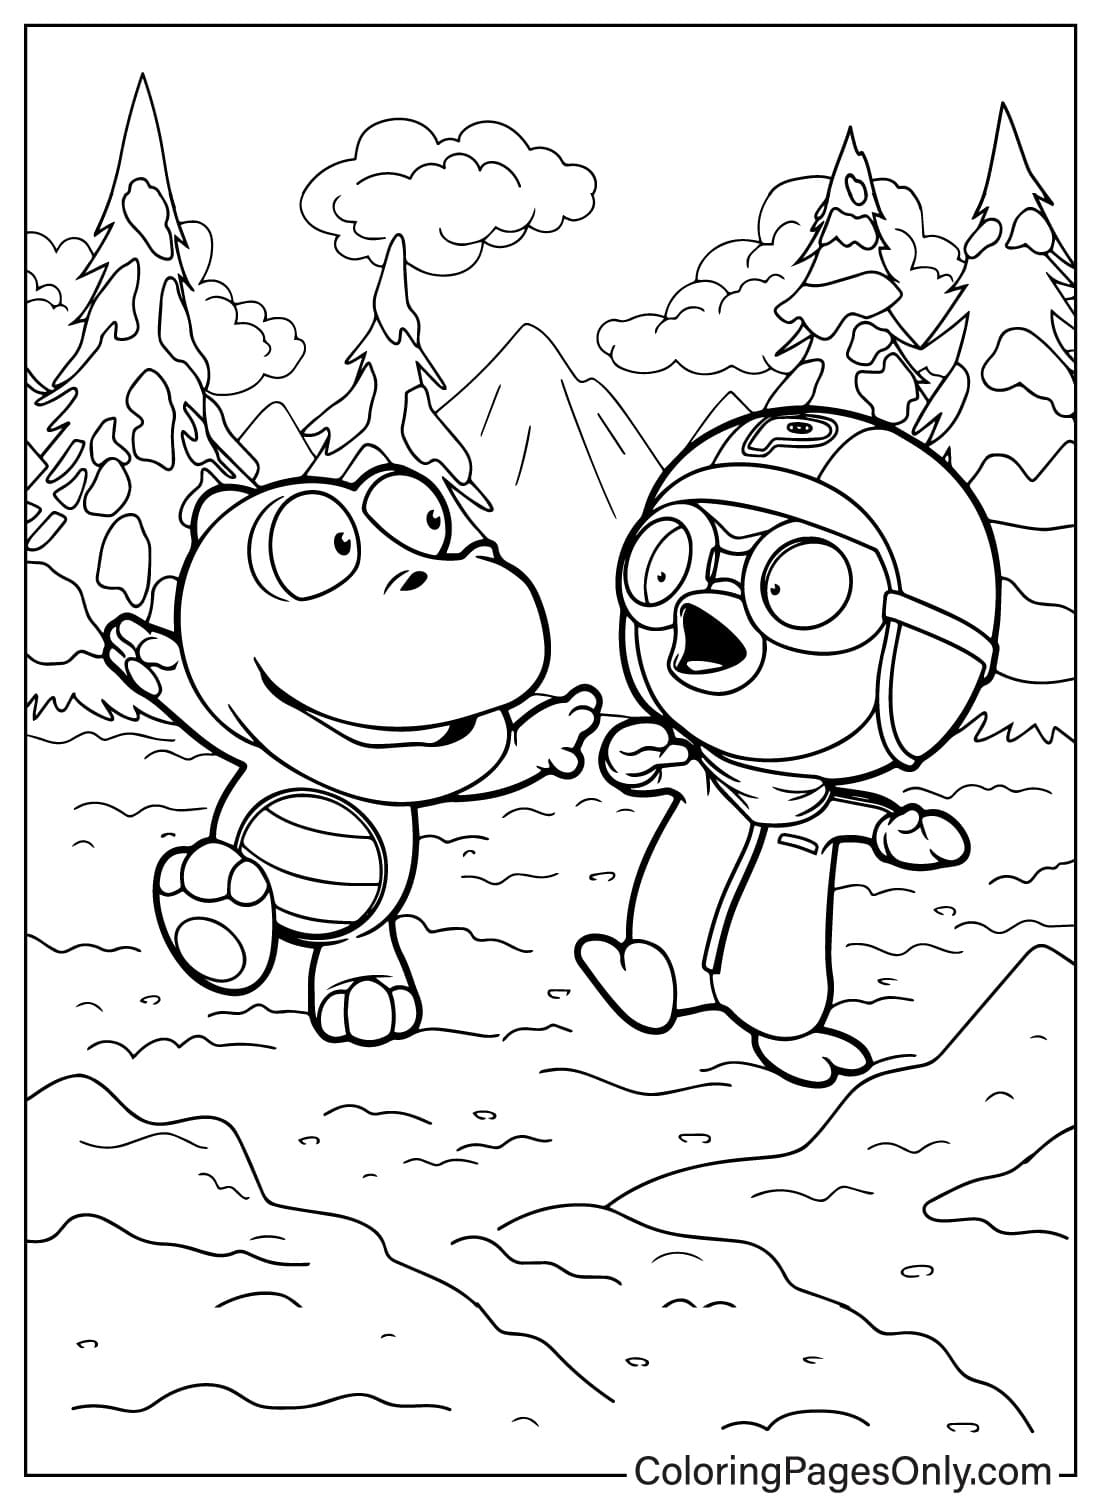 Crong and Pororo Coloring Page from Pororo the Little Penguin